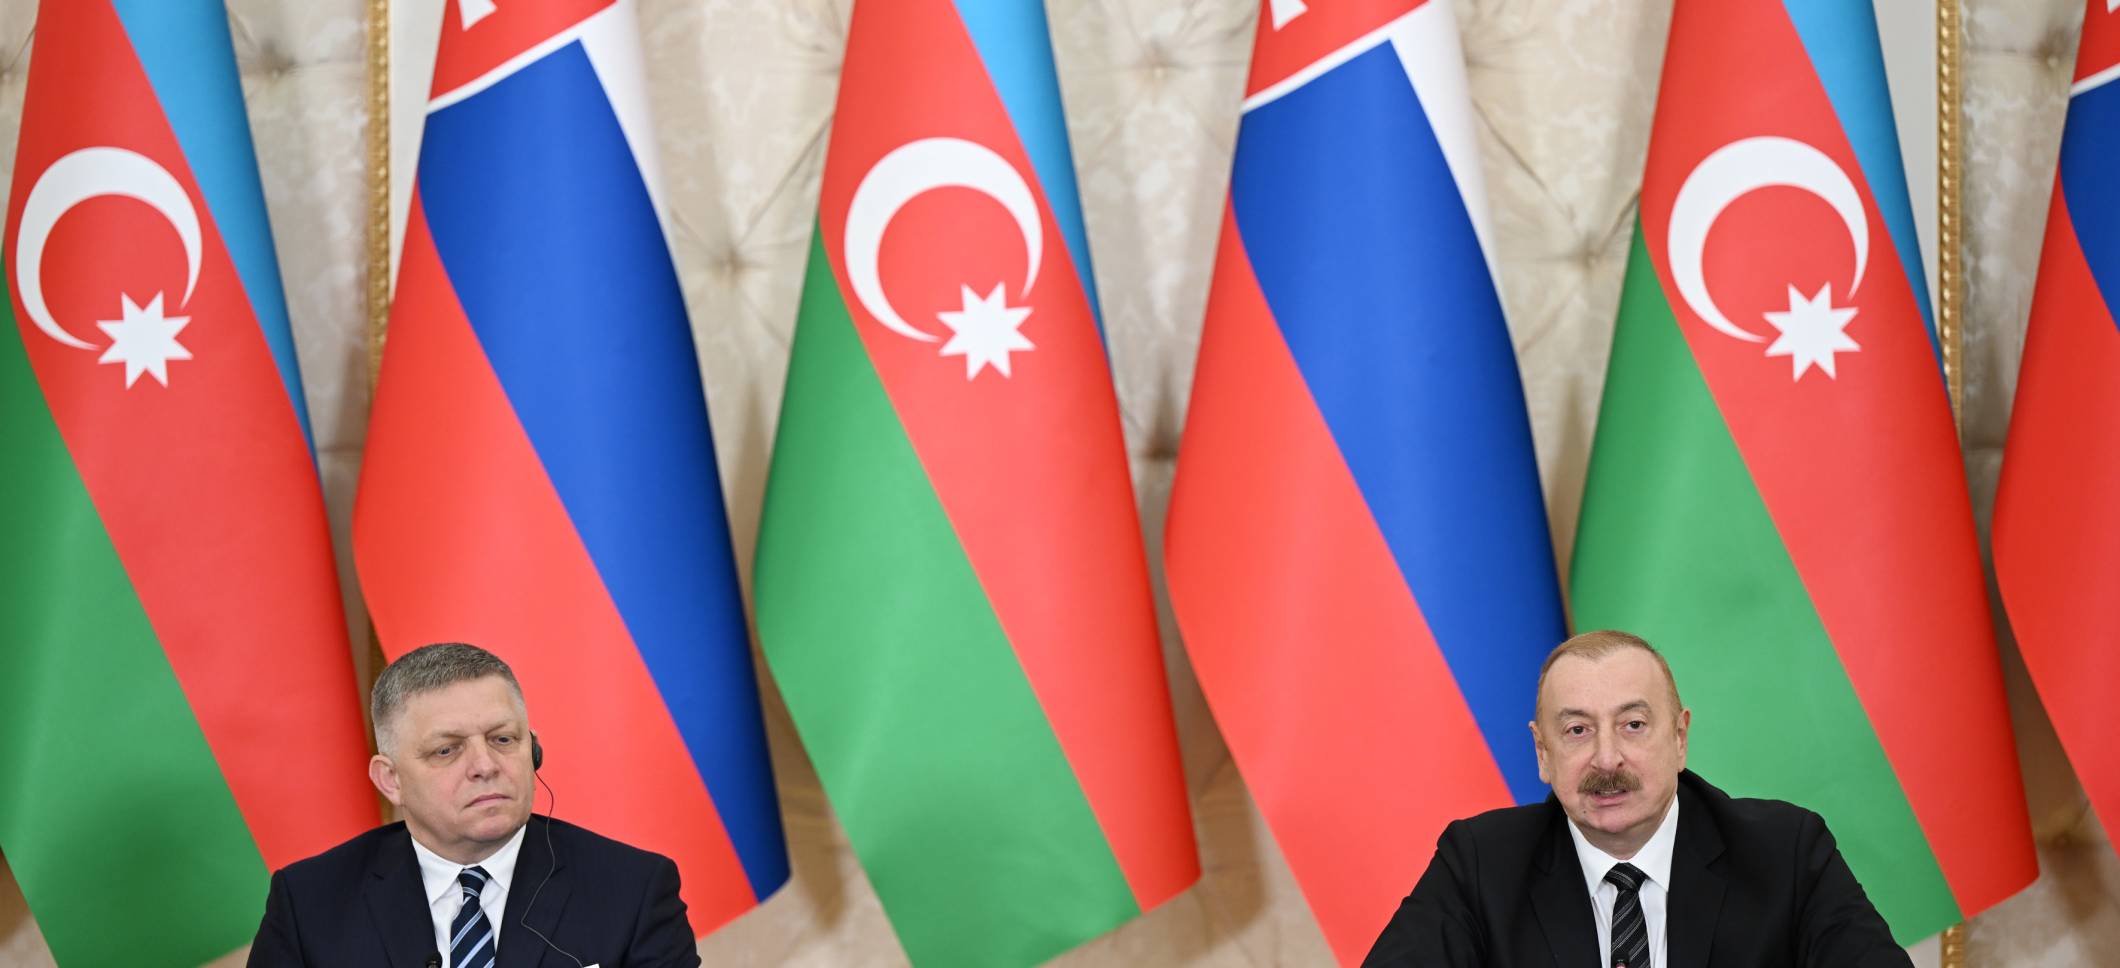 Ilham Aliyev and Prime Minister Robert Fico made press statements